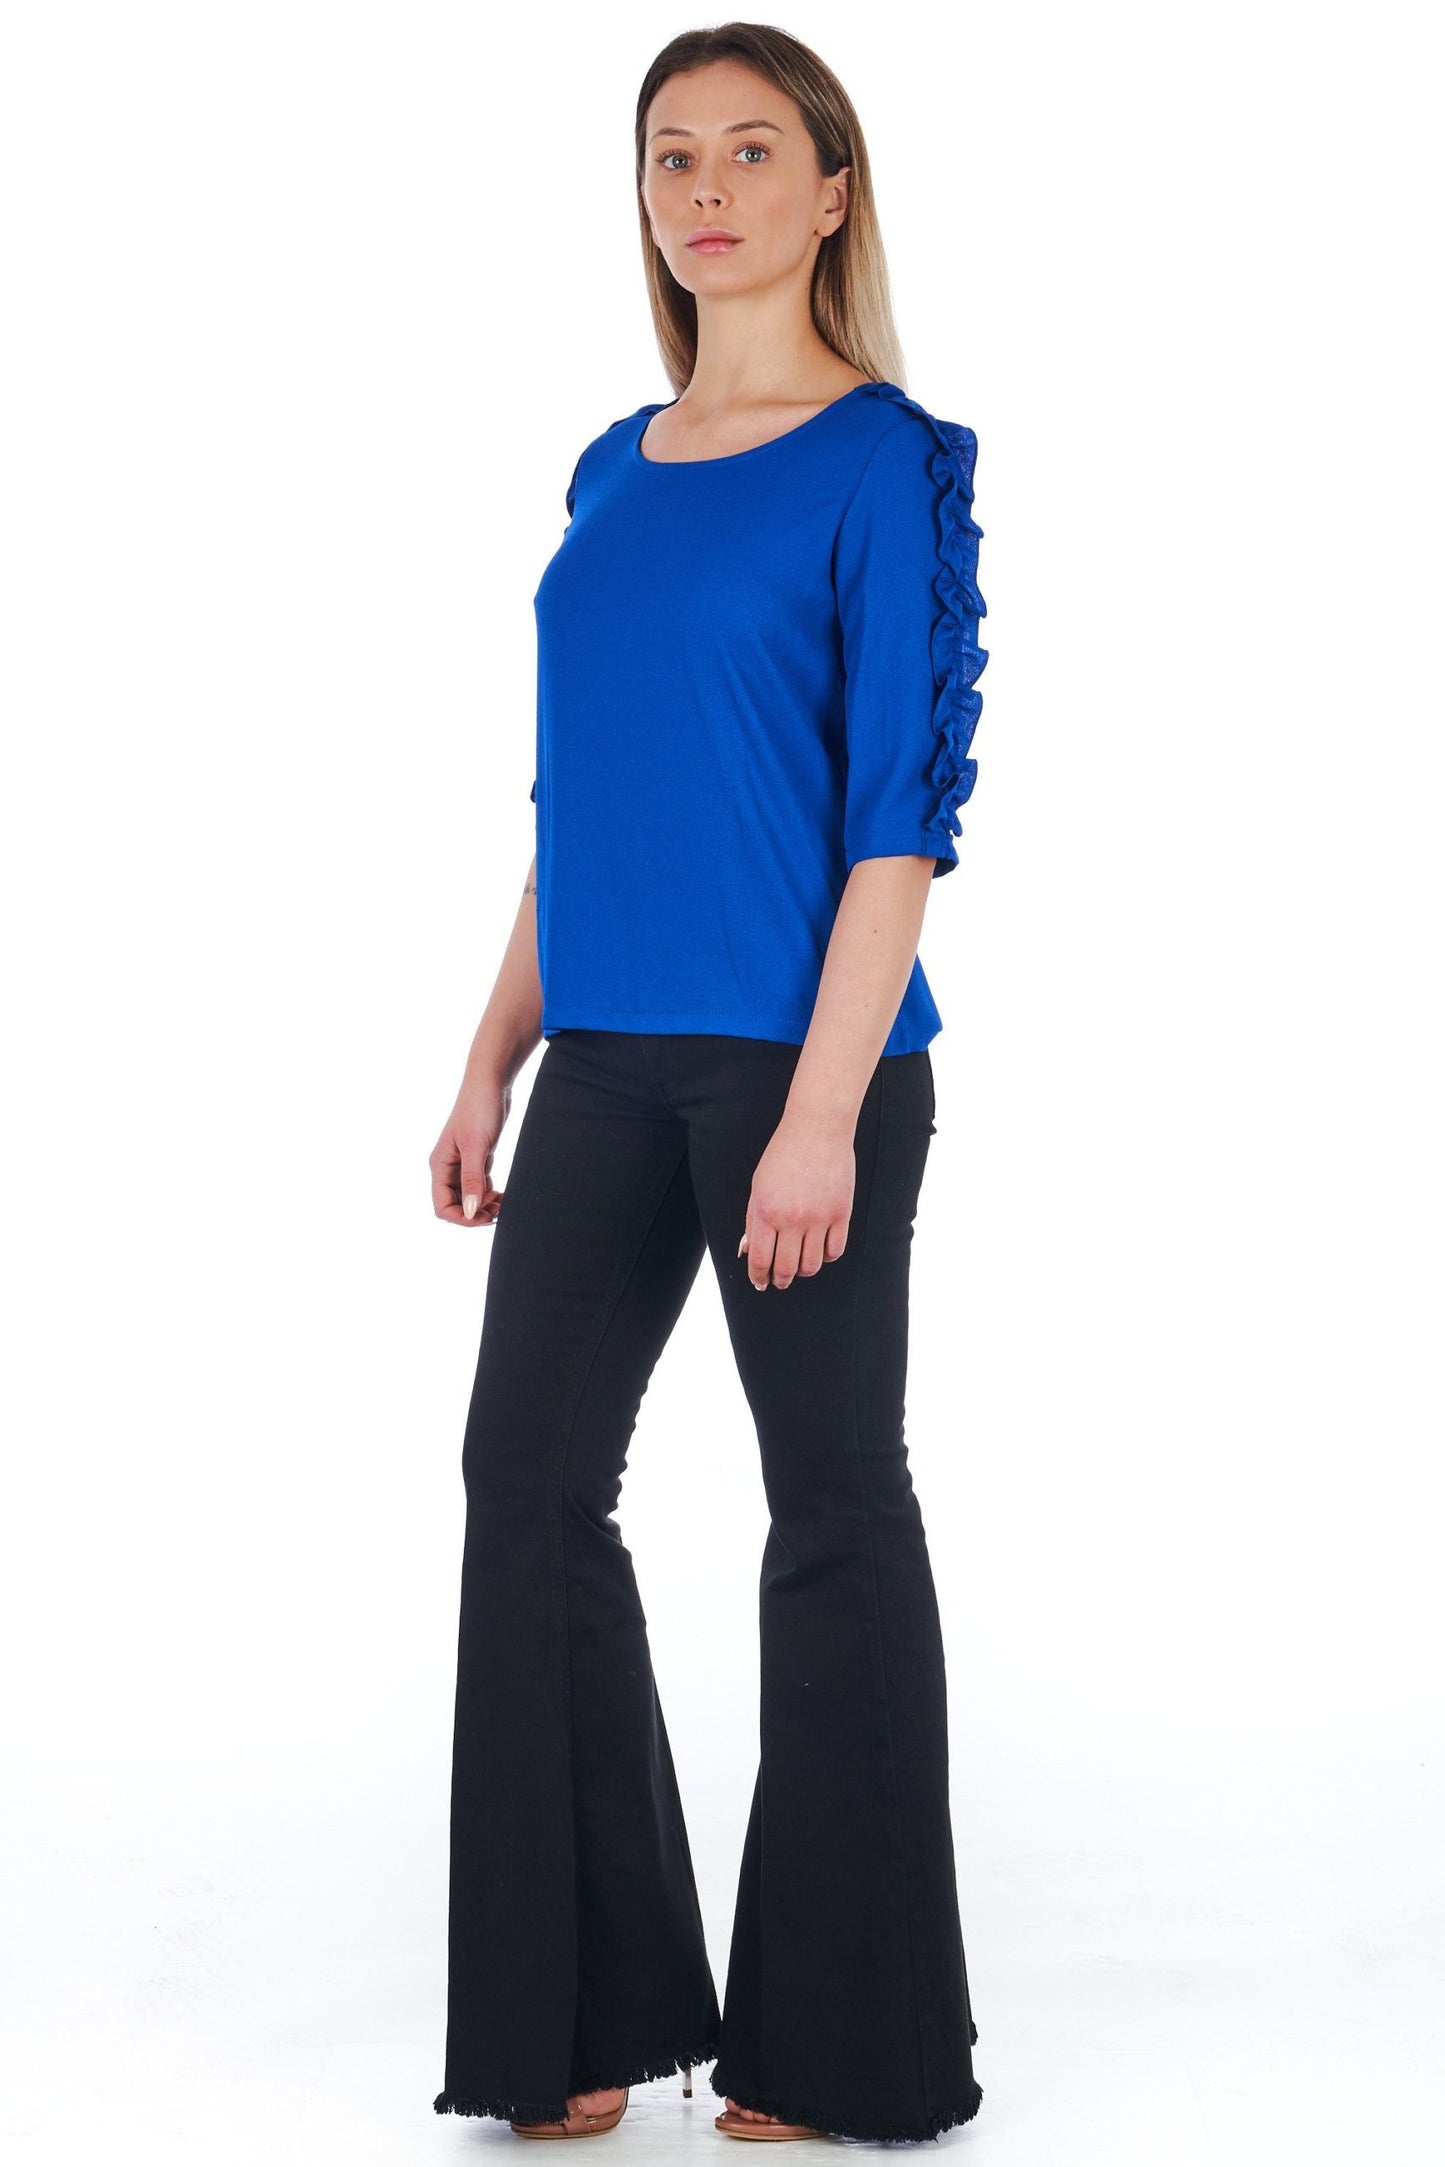 Chic Blue Blouse with Elegant 3/4 Sleeves